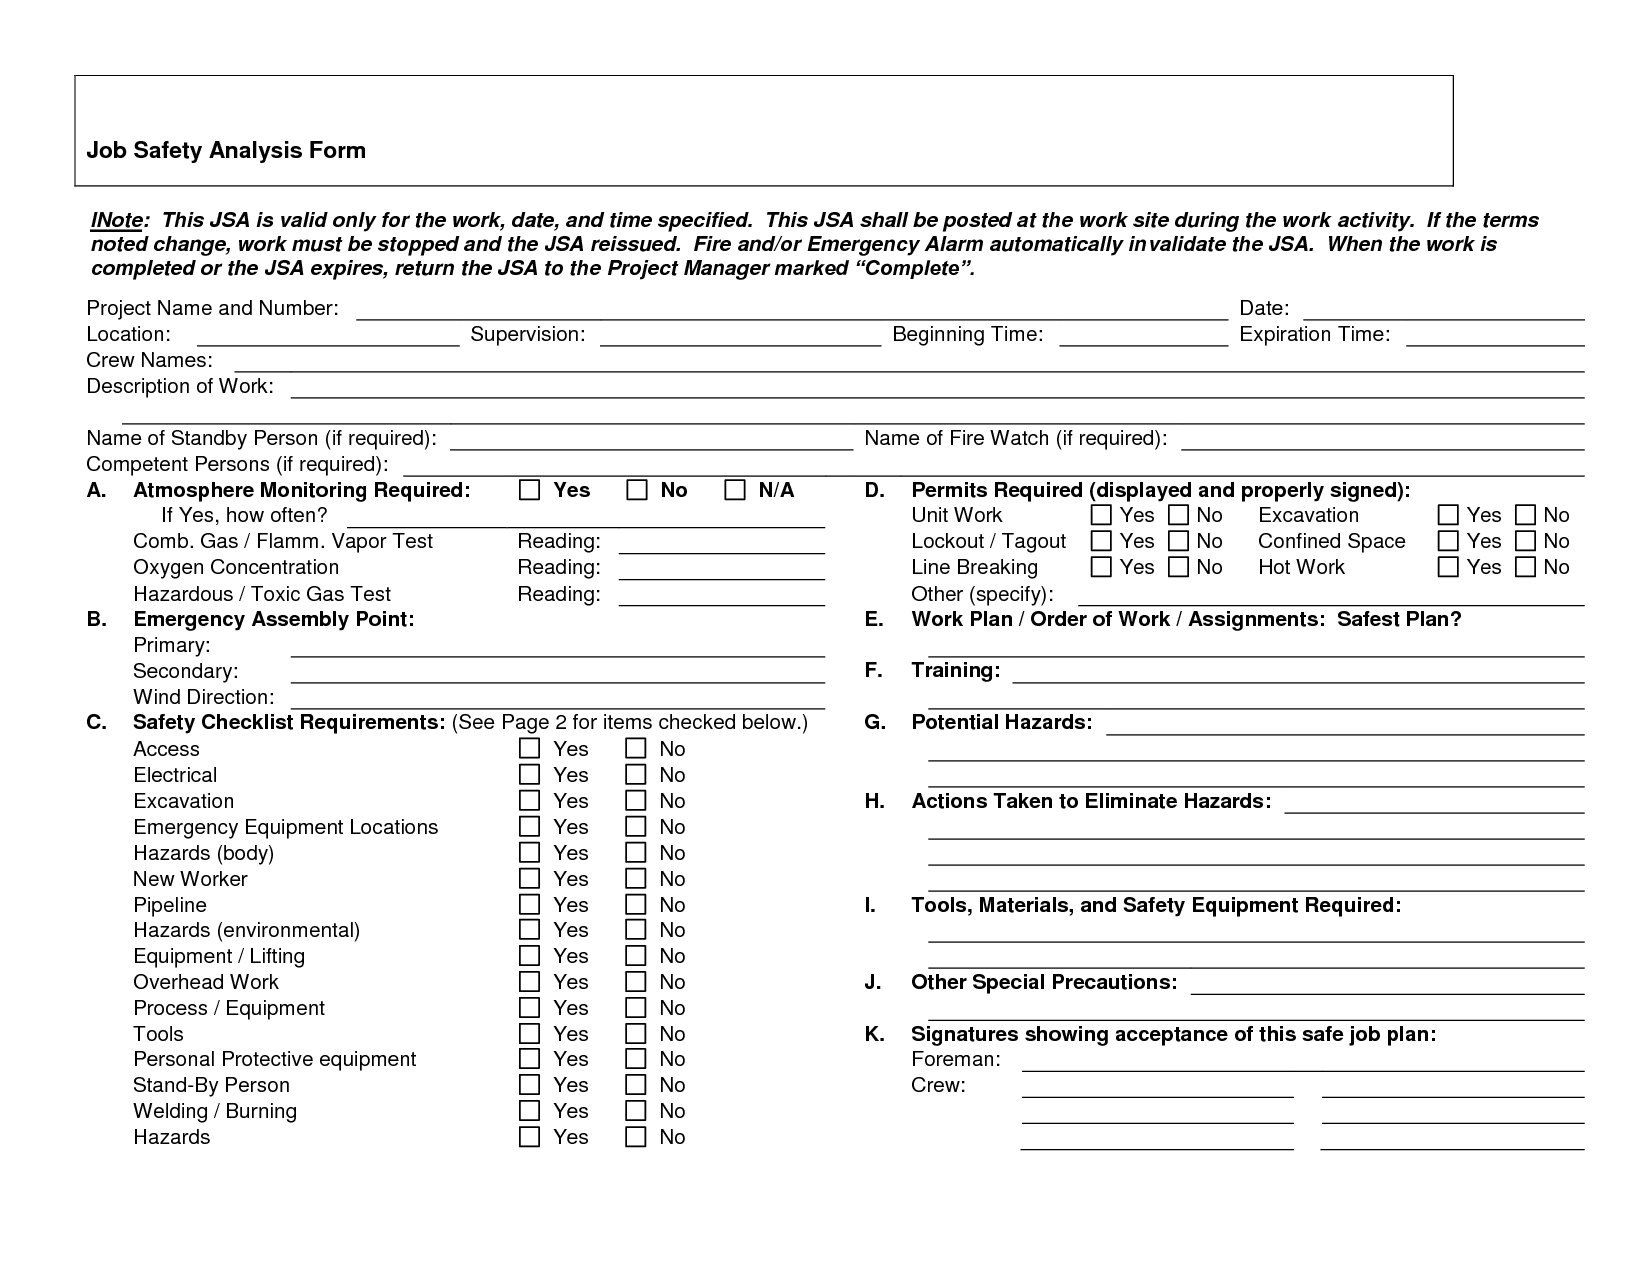 Job Safety Analysis Examples  Pdf Word Pages  Examples inside Safety Analysis Report Template